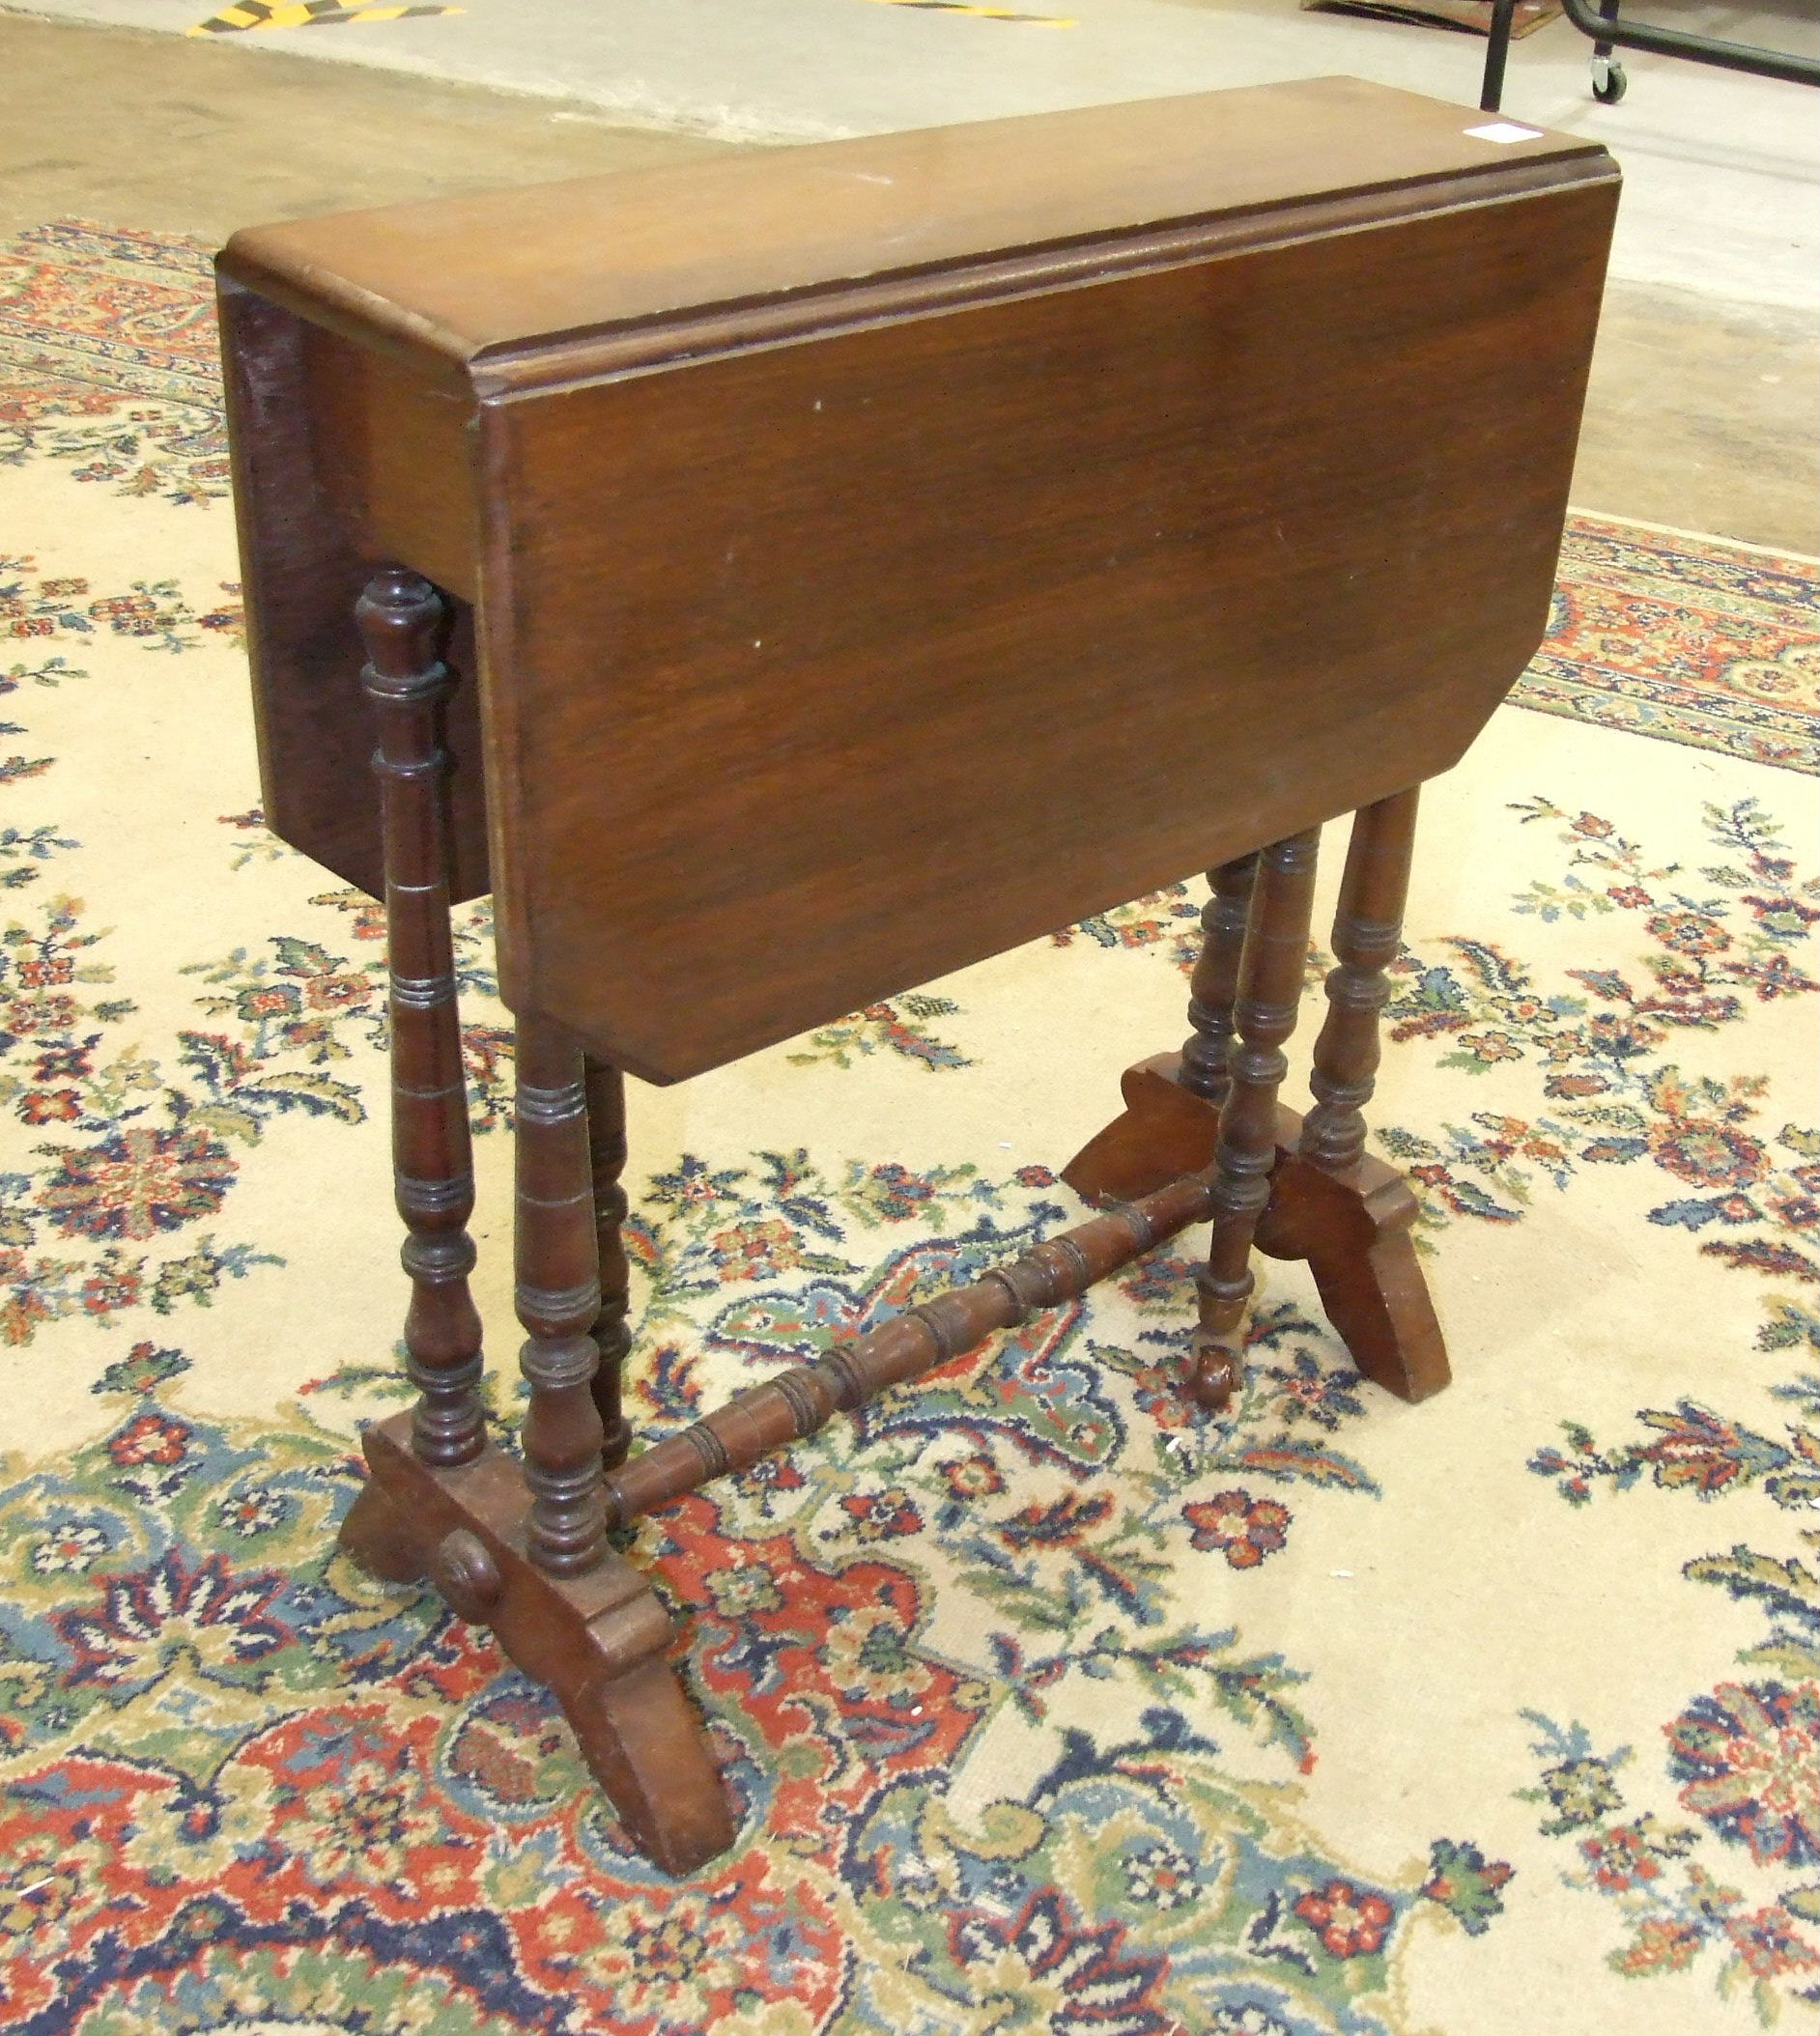 An Edwardian walnut small Sutherland table, with drop leaves, on turned legs, 62 x 50cm open.